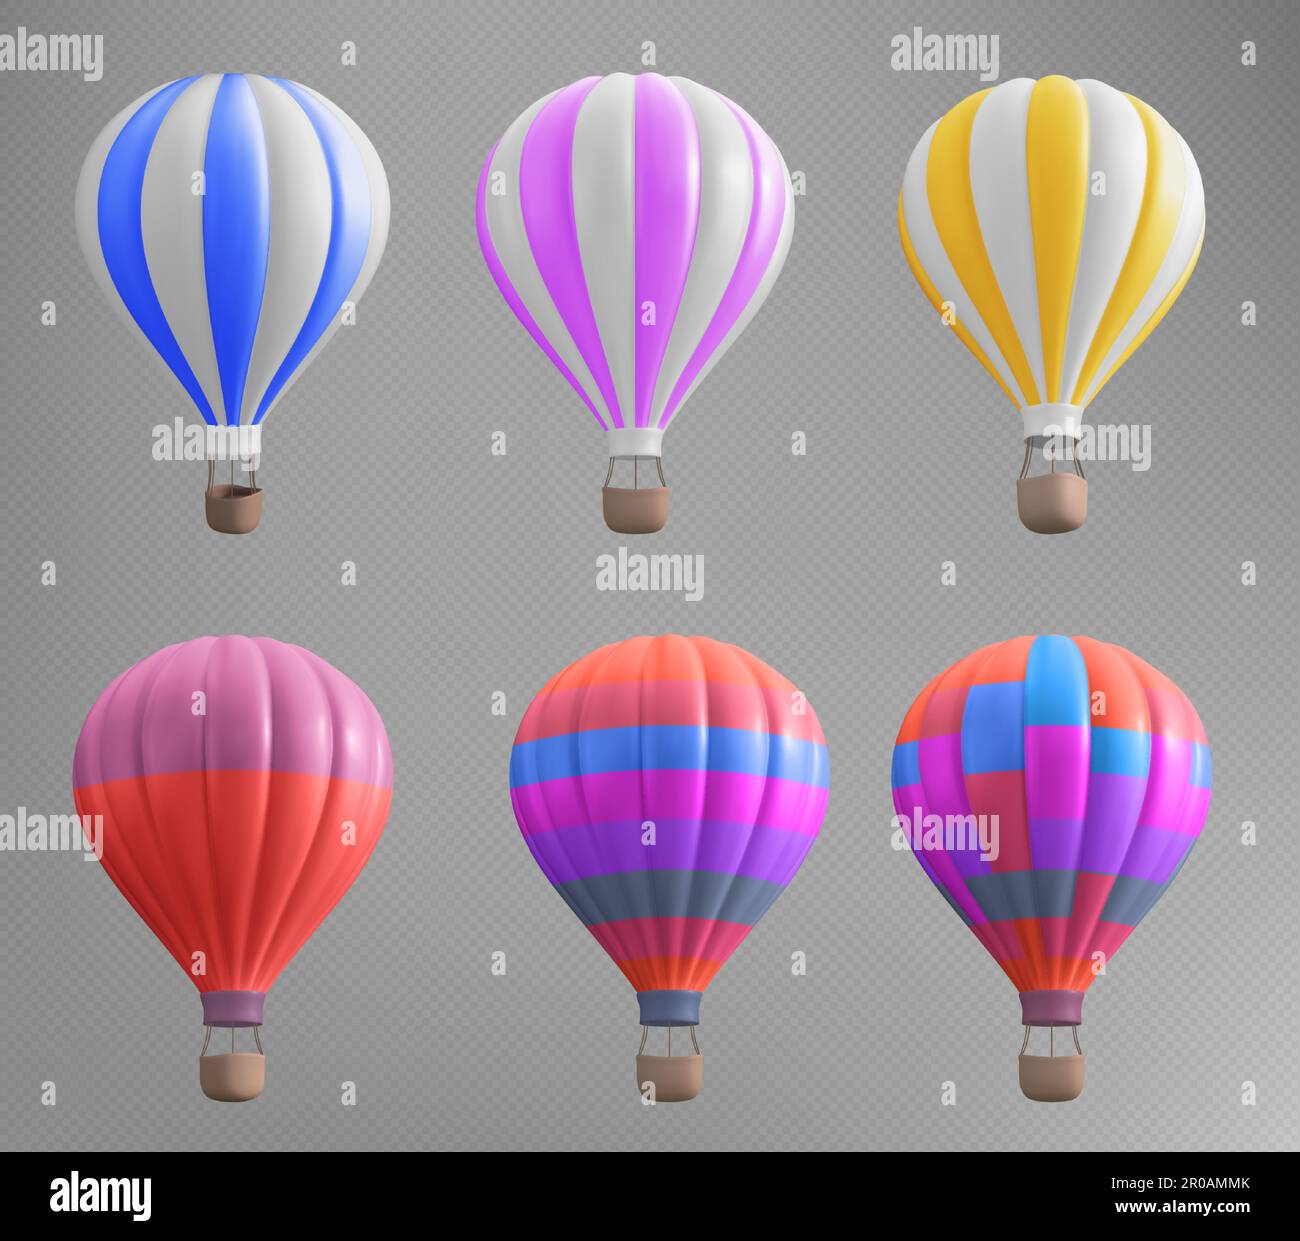 3d isolated hoy air balloon basket travel illustration on transparent background. Realistic aerostat set in red, blue and pink stripe for adventure and recreation. Summer ballooning leisure journey Stock Vector